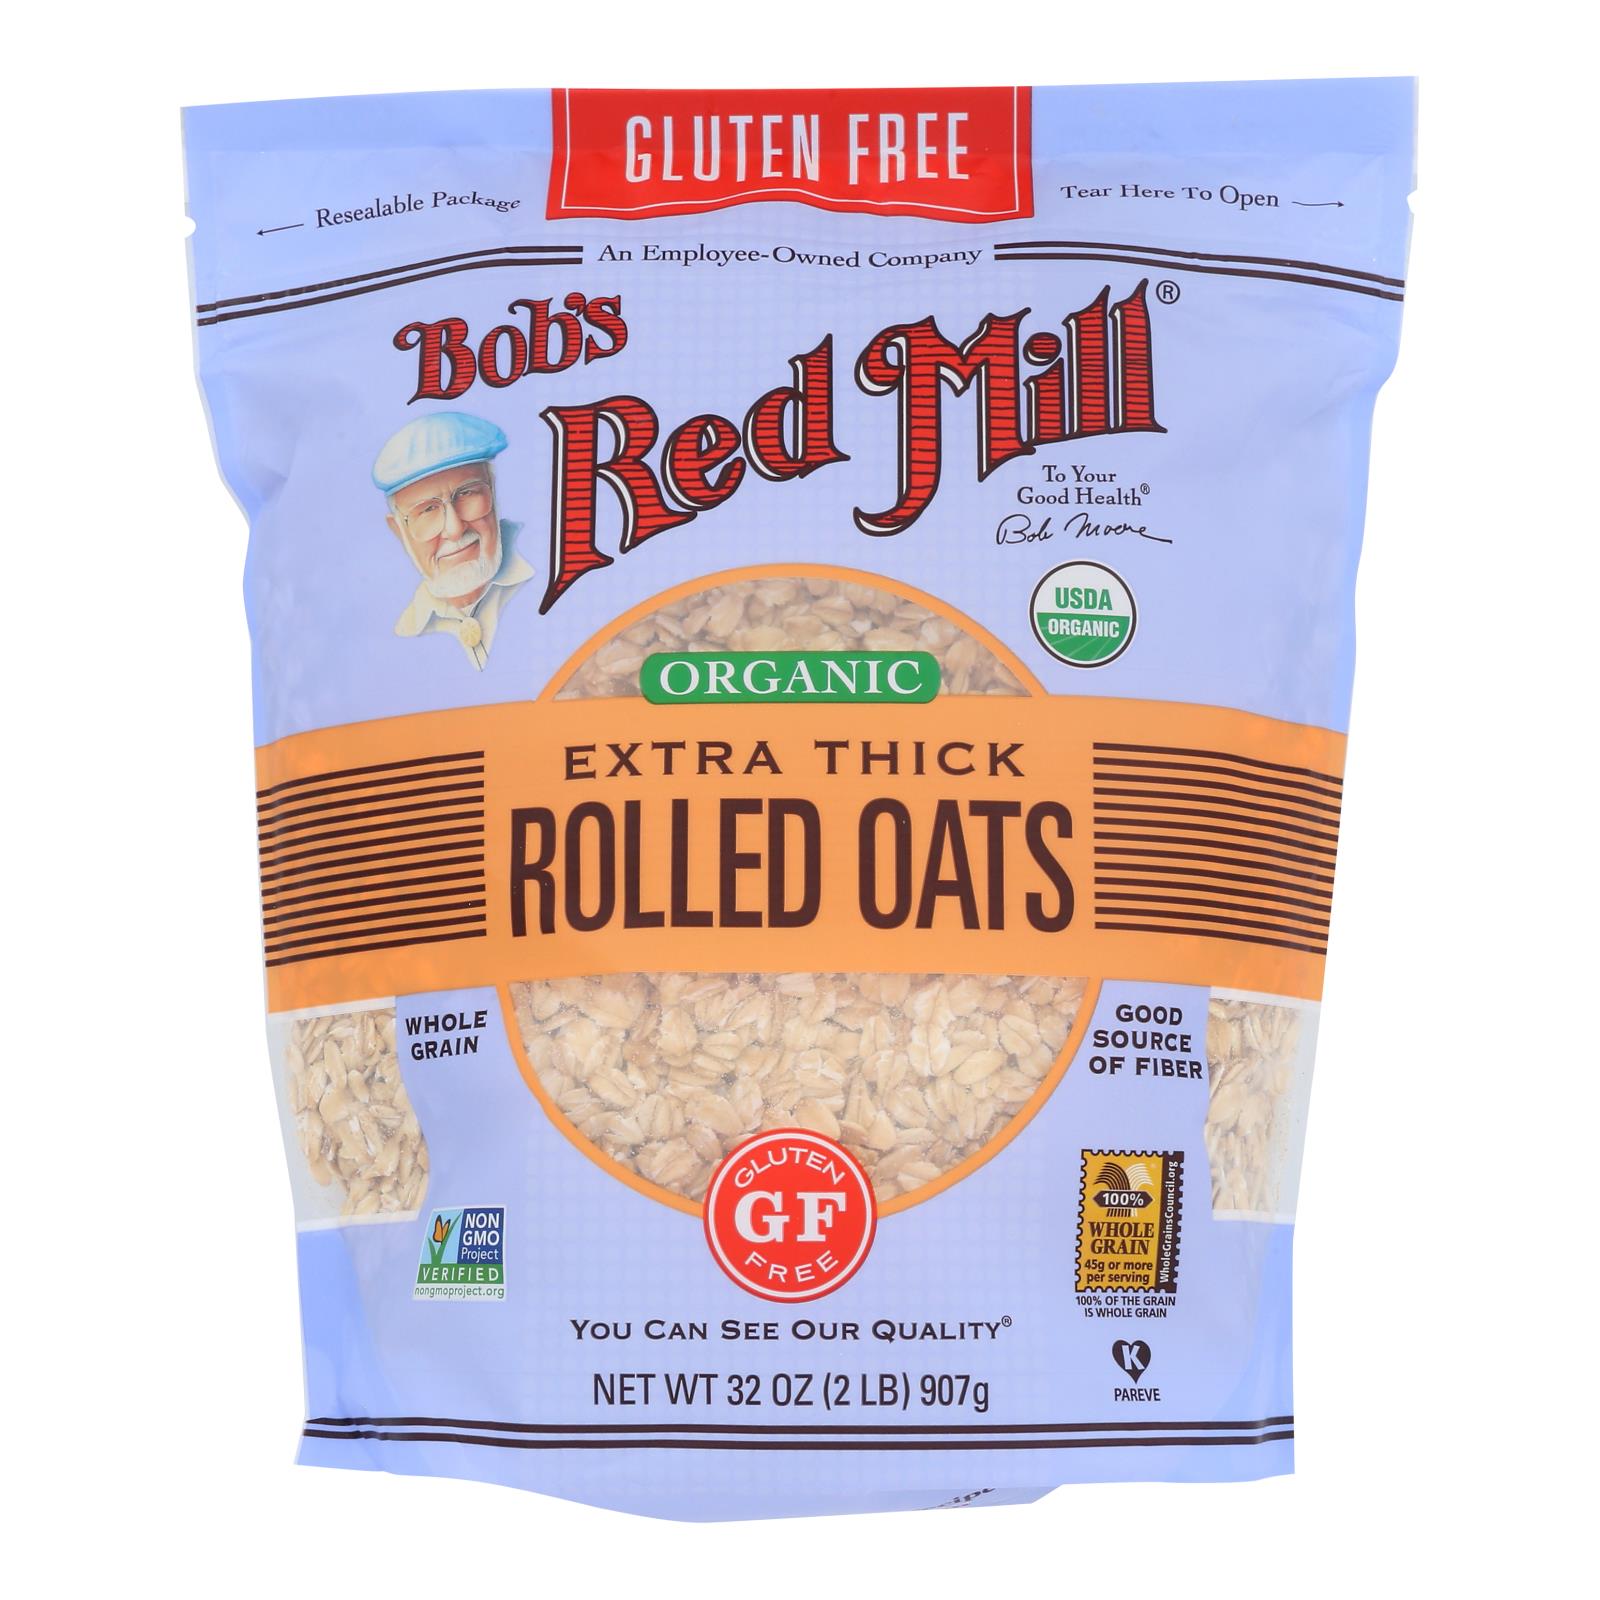 Bob's Red Mill - Organic Thick Rolled Oats - Gluten Free - Case of 4-32 OZ